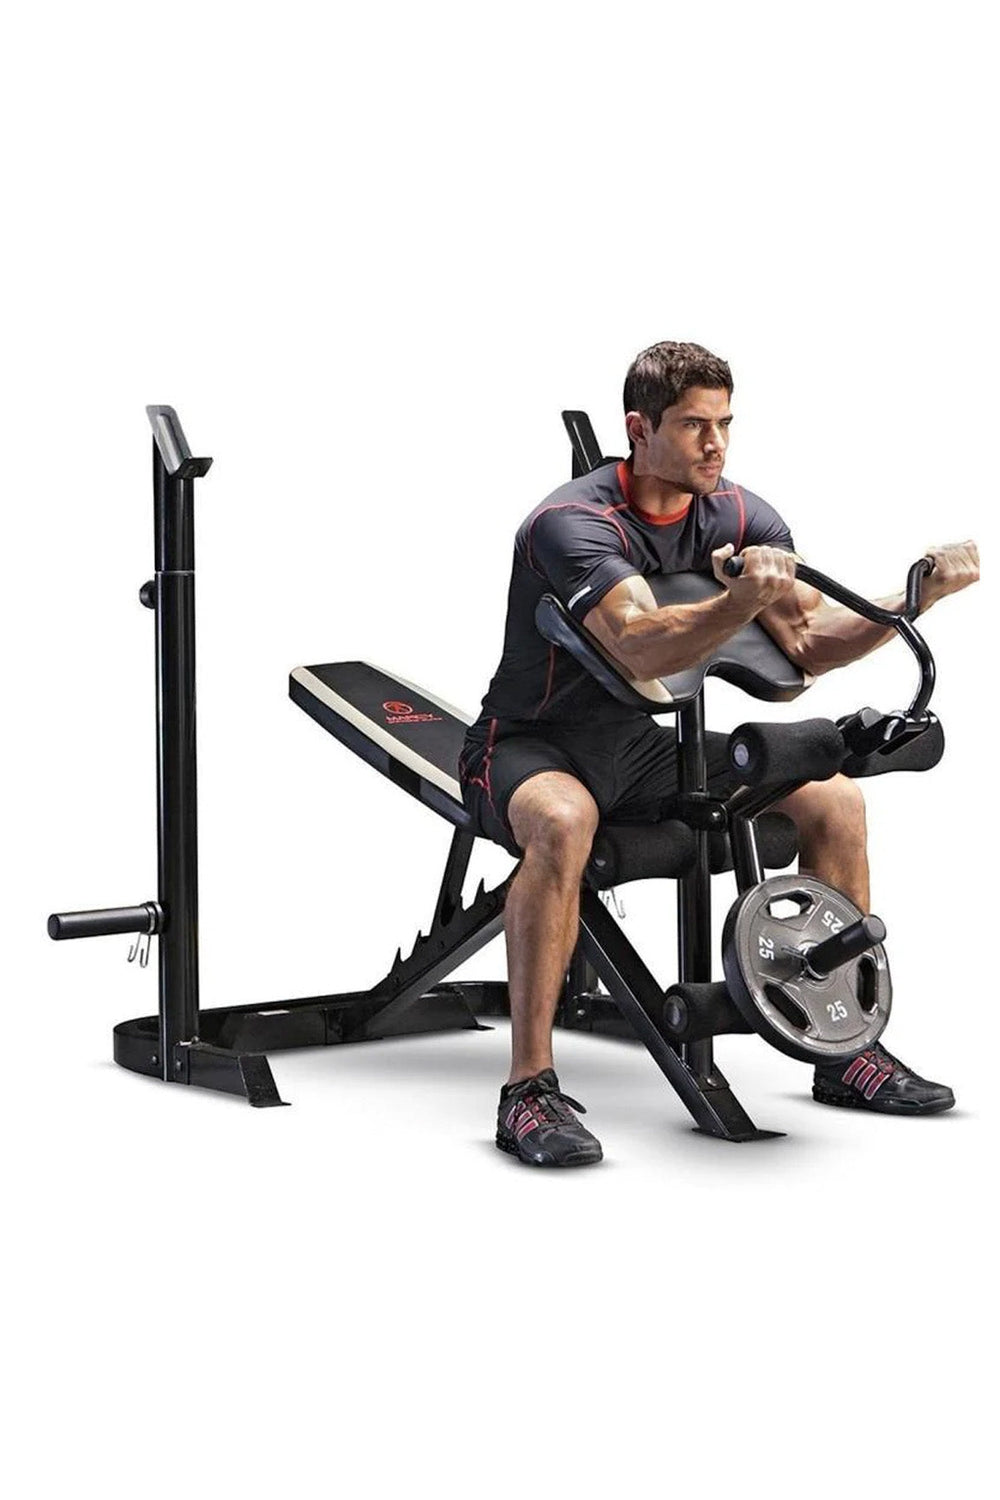 man performing preacher curl on weight bench